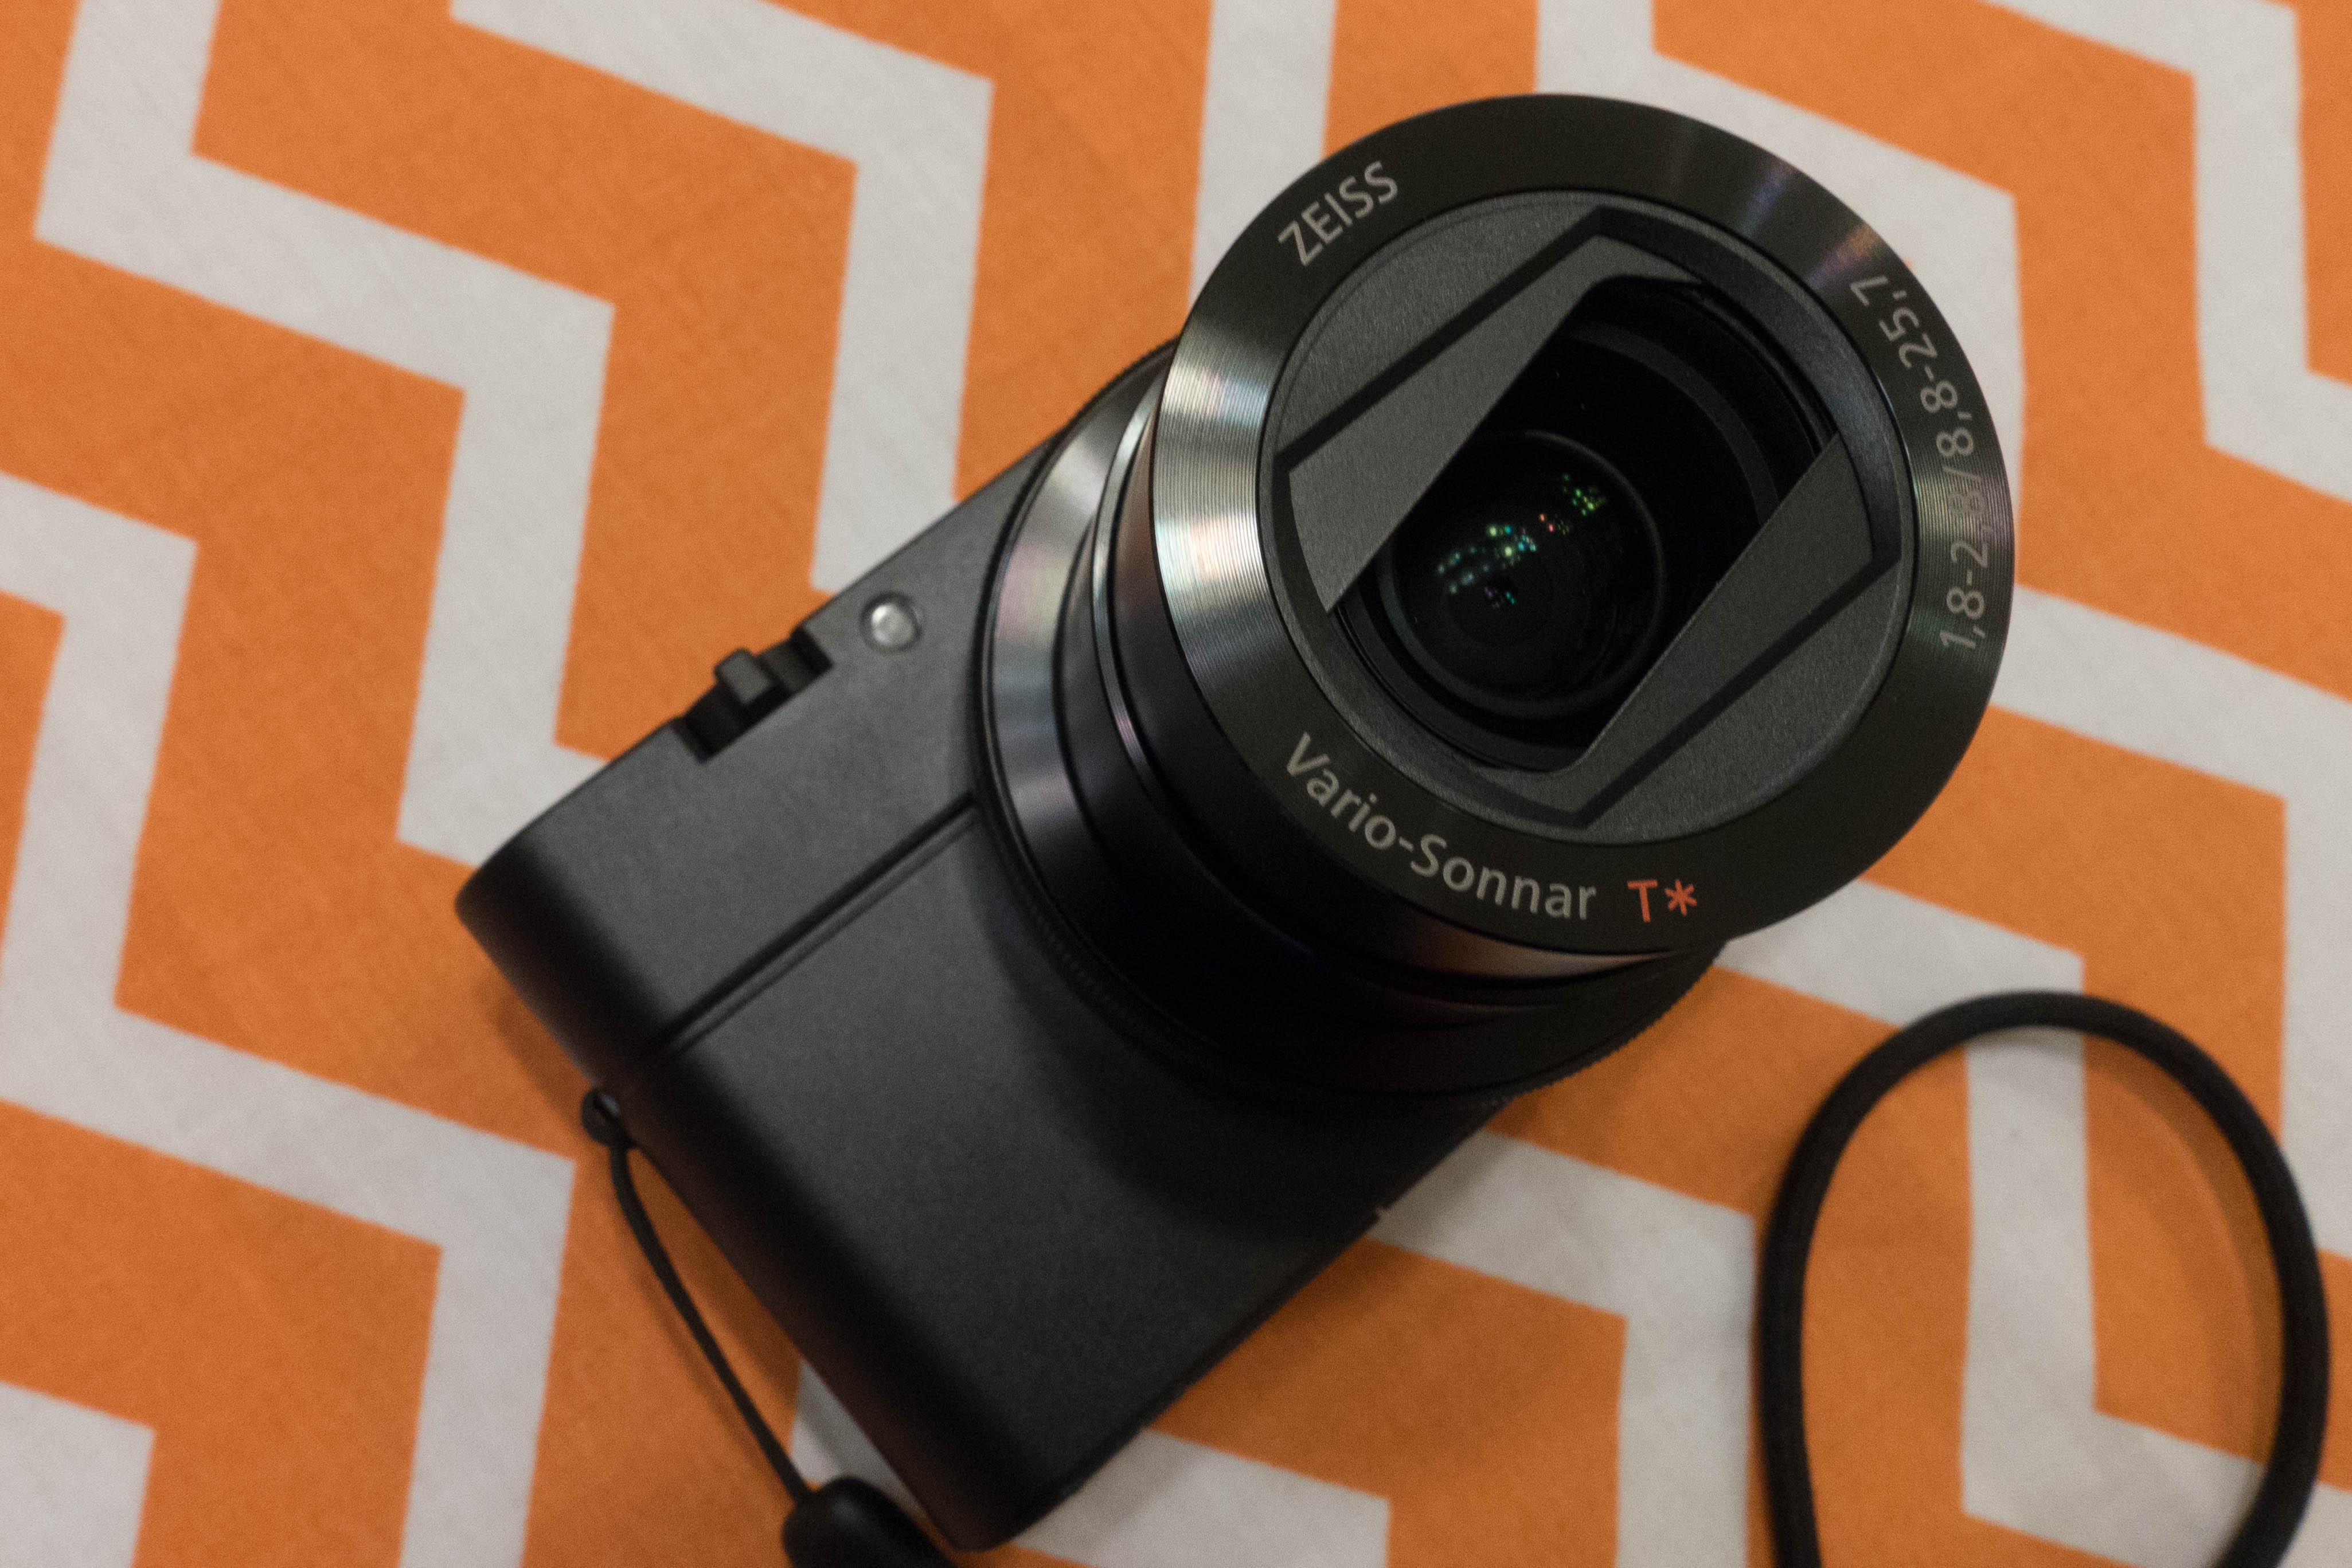 A Review of the RX100 III, or Why I Bought the RX100m3 Twice